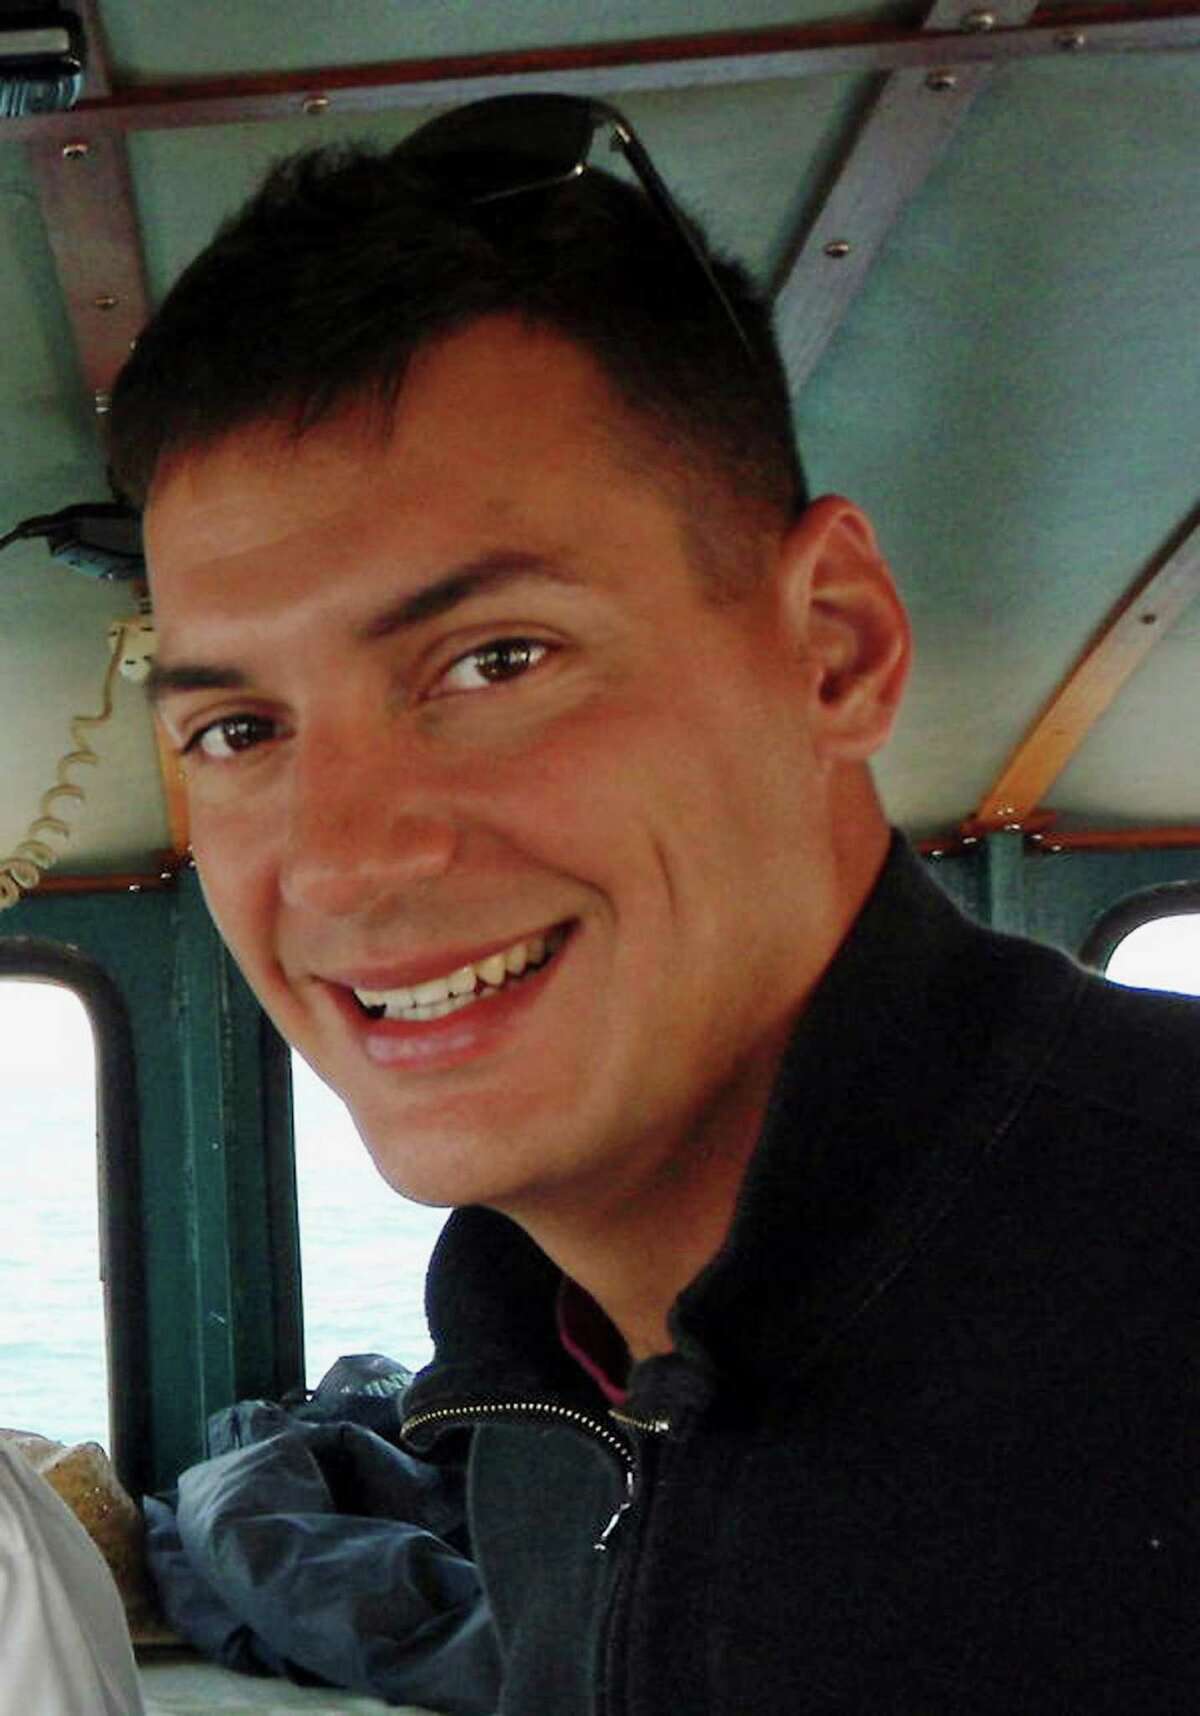 As a Marine veteran, Austin Tice understood the risks he was taking.